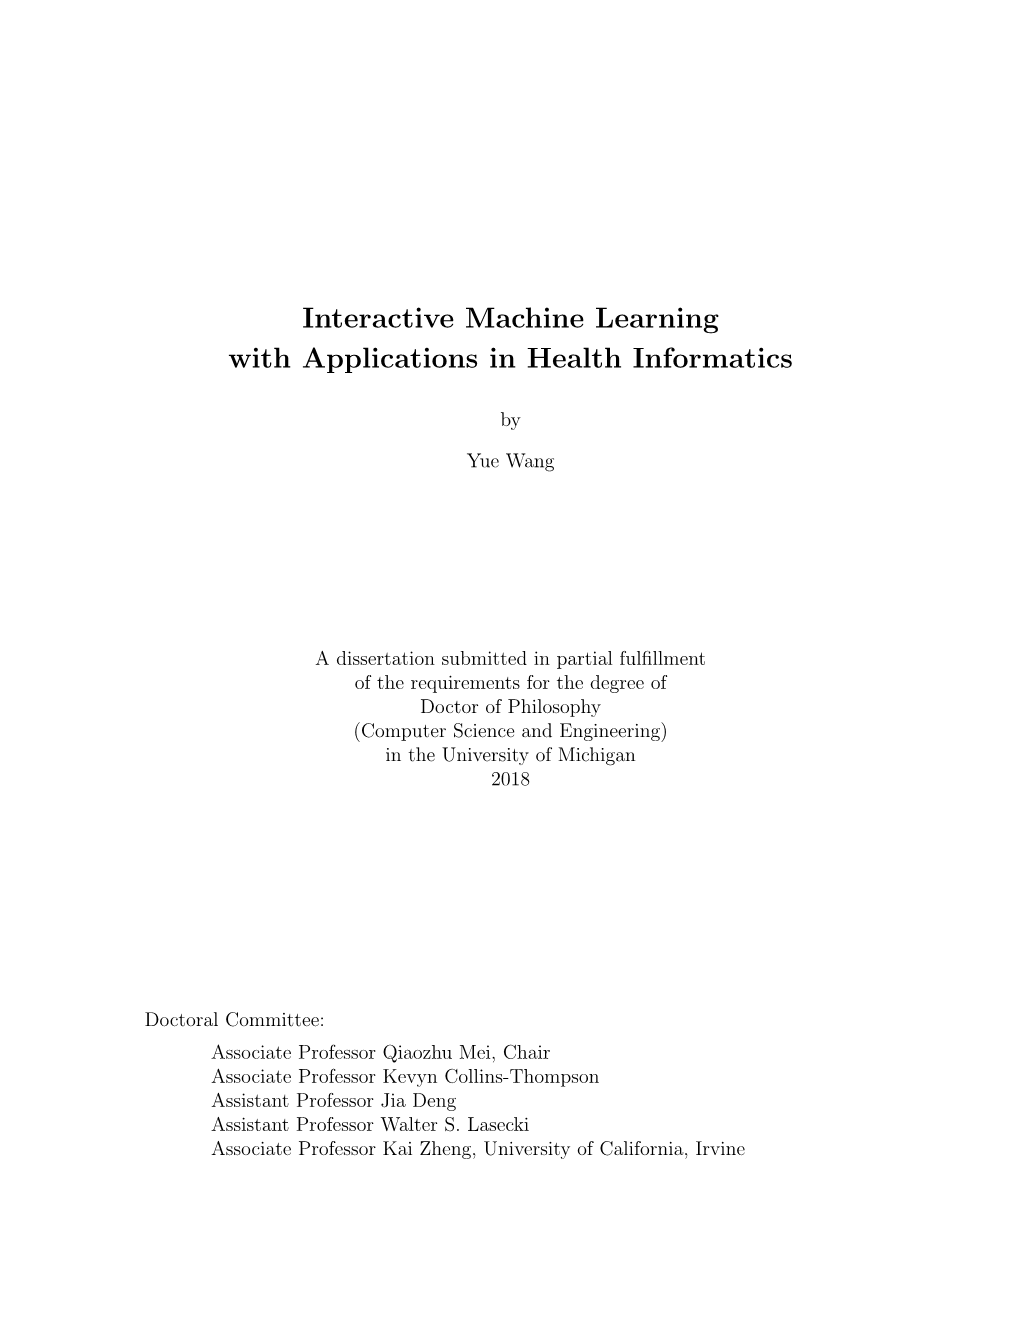 Interactive Machine Learning 0.4Em with Applications in Health Informatics